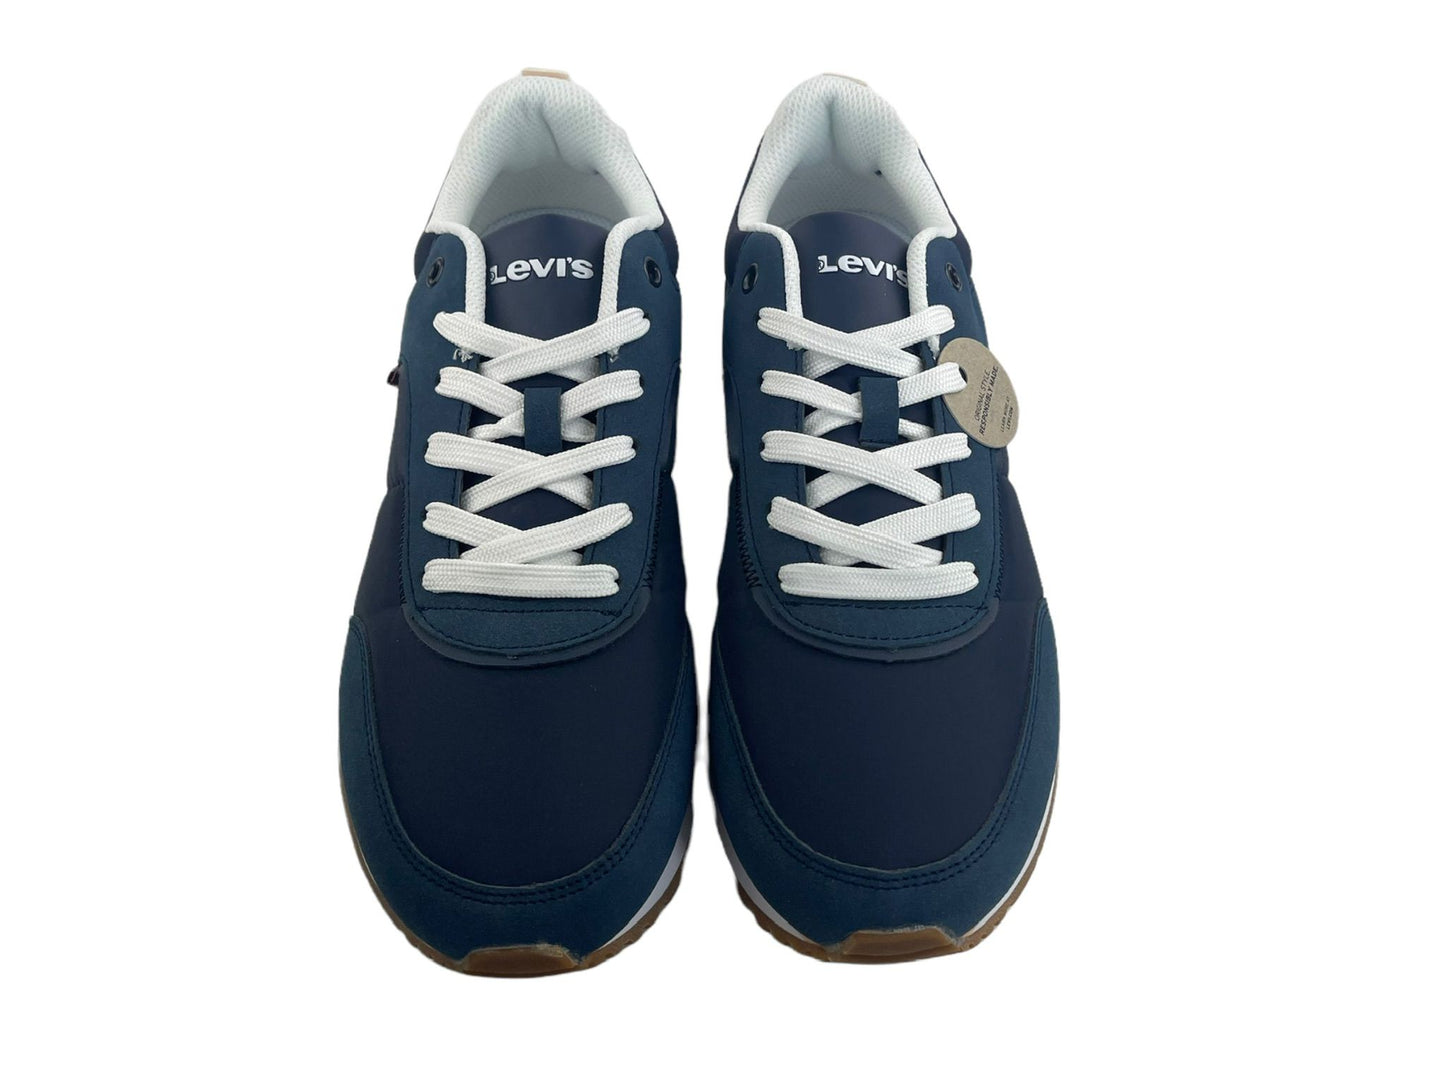 Levi's | Women's navy blue pink eco-leather Albuquerque sneakers